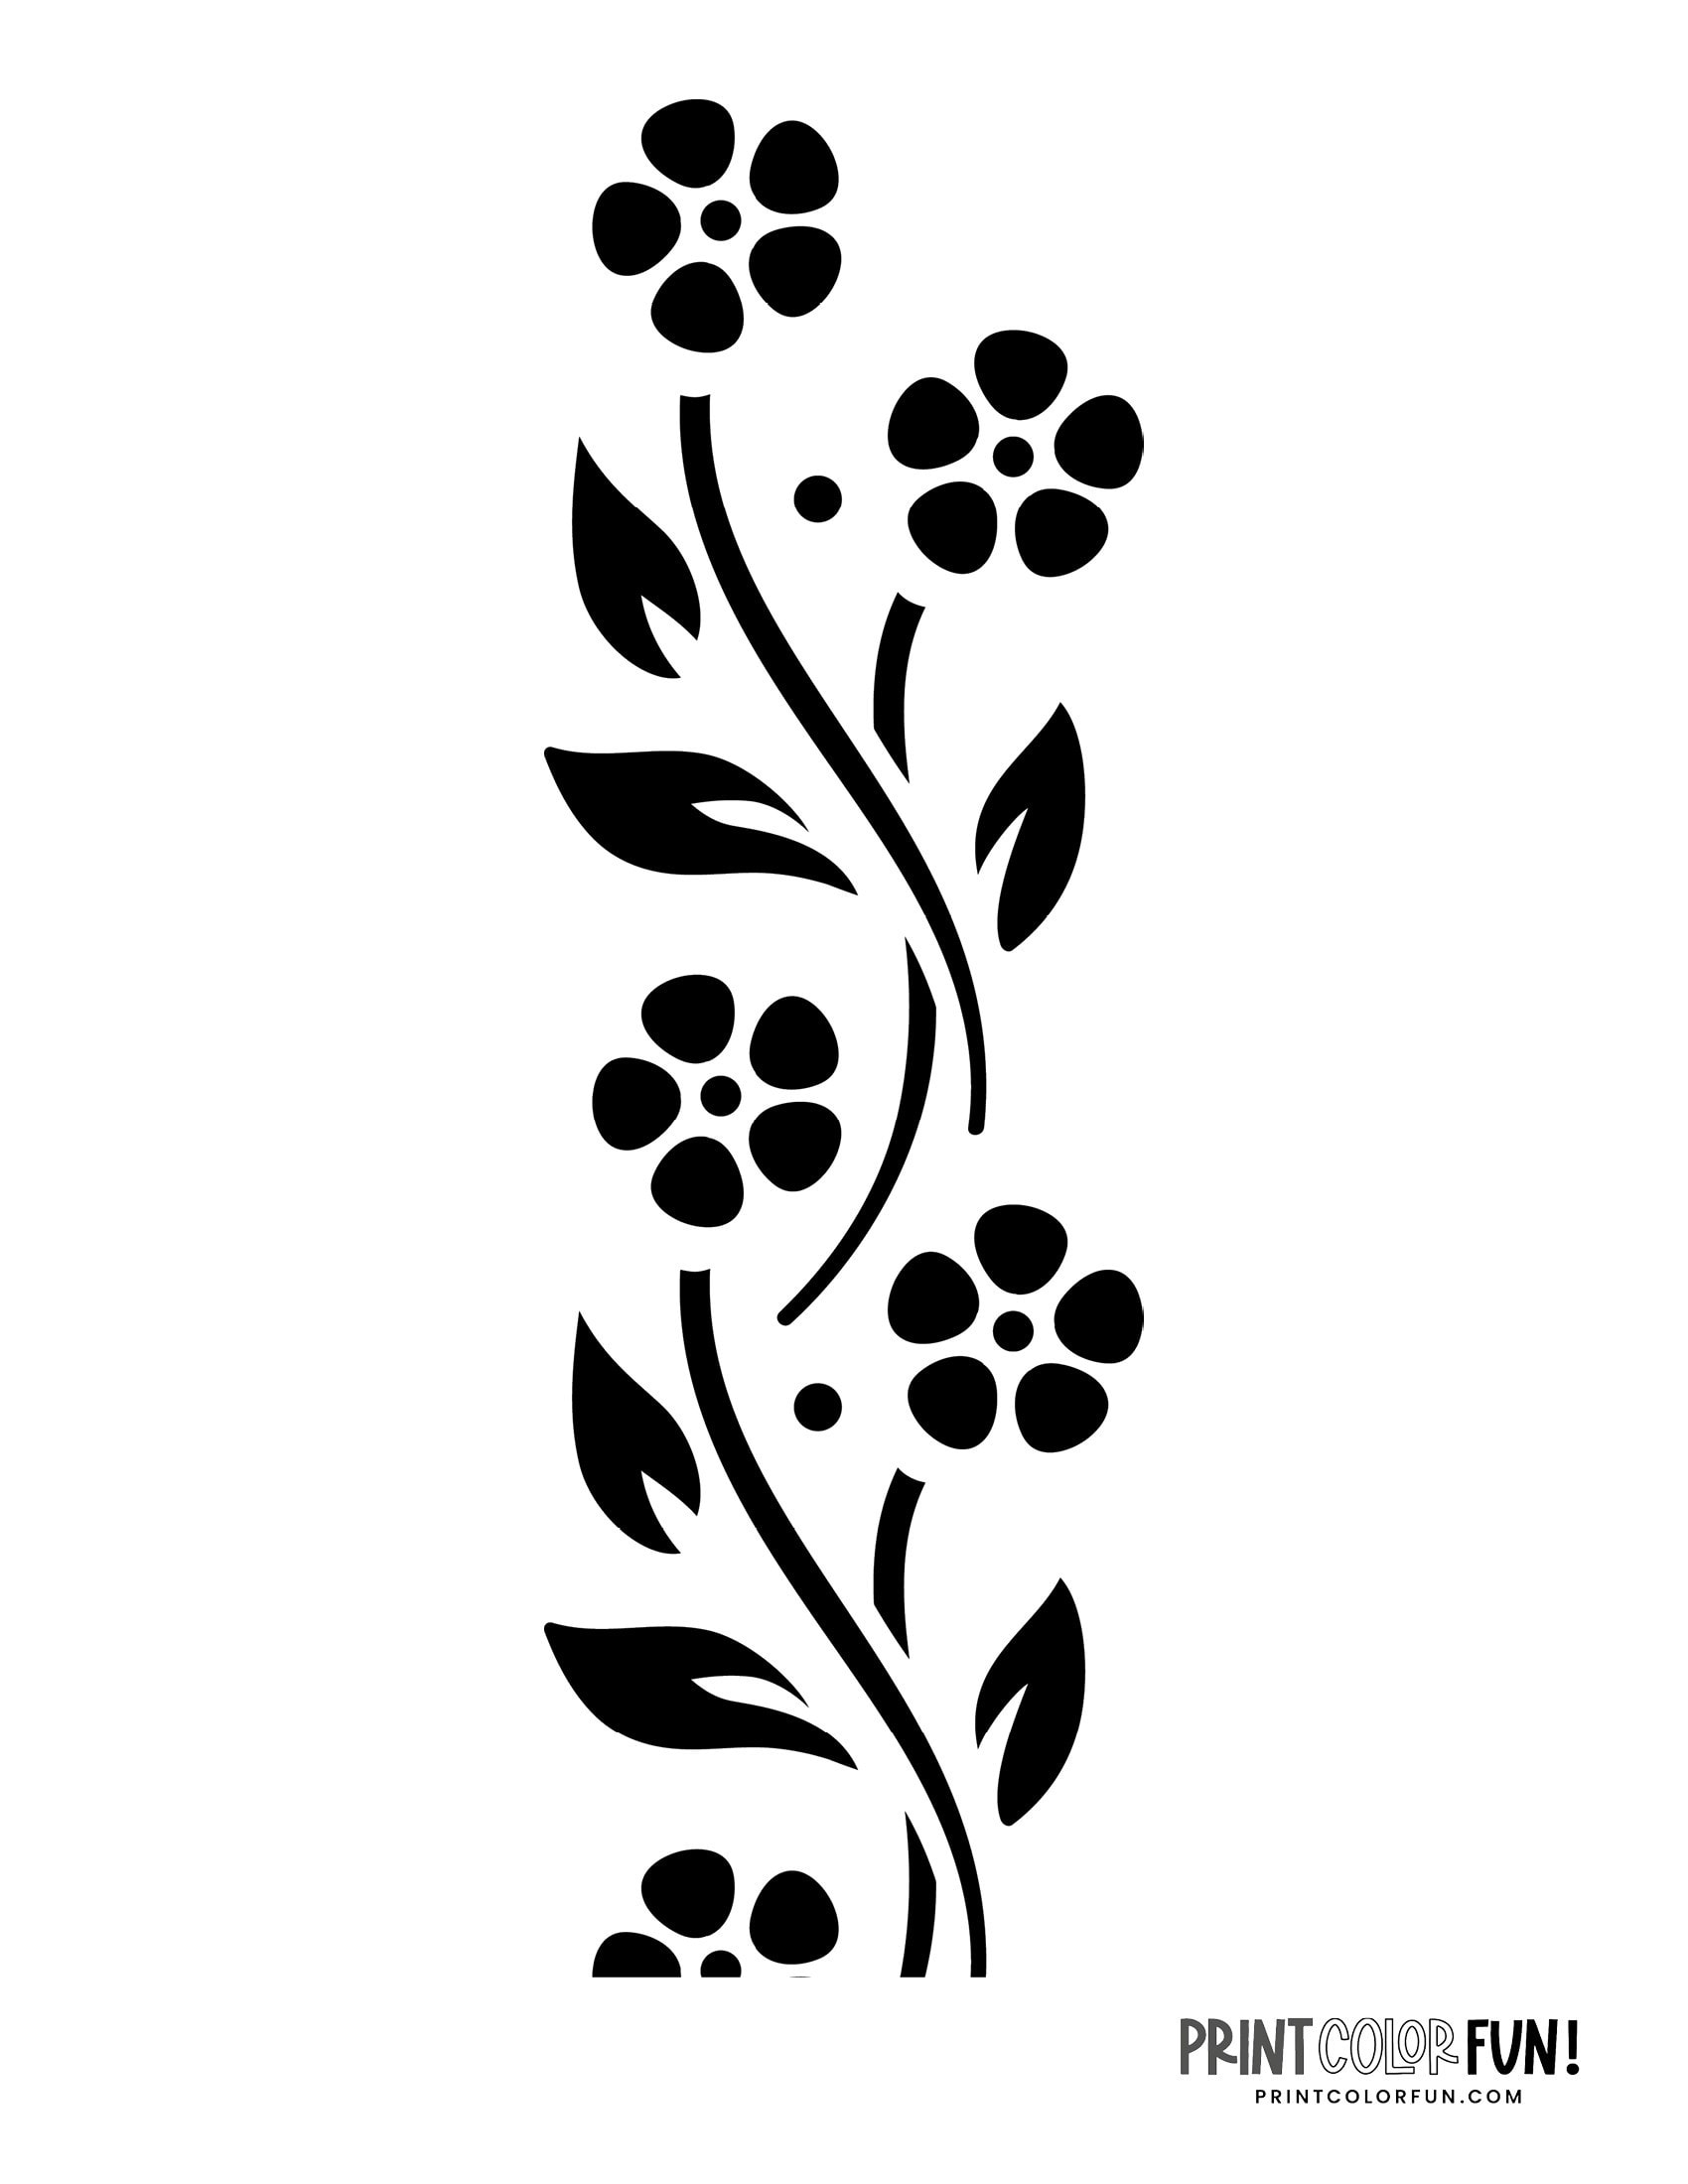 10 free flower stencil designs for printing & craft projects Print